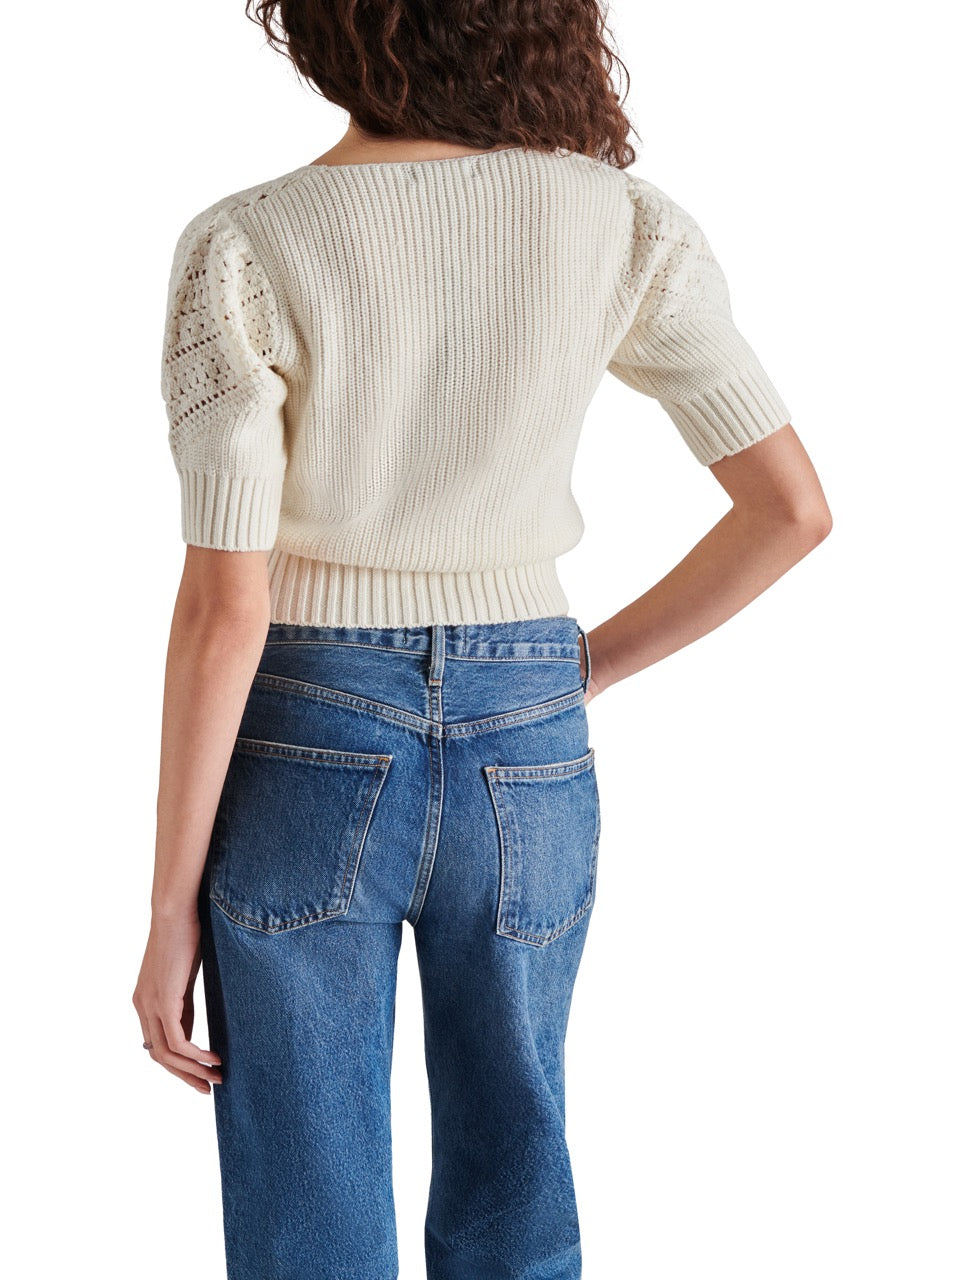 Steve Madden Darcia Short Sleeve Sweater in ivory-back  view